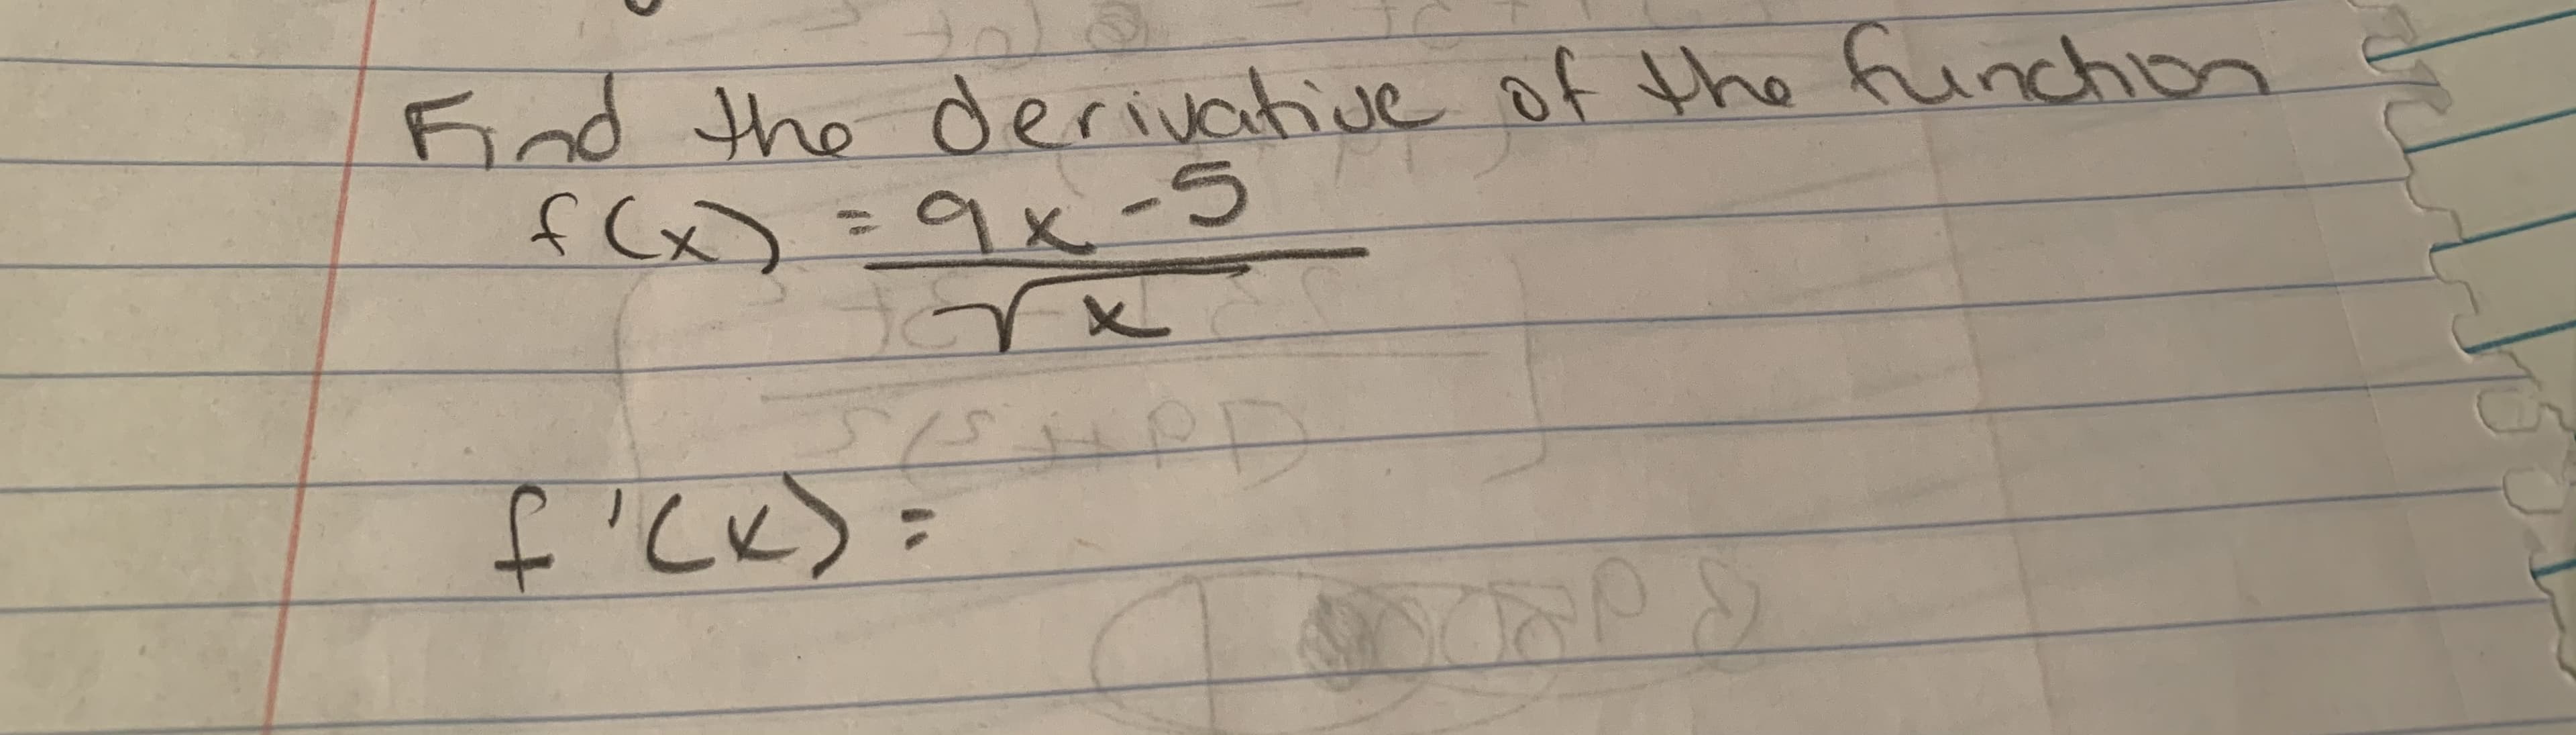 Find the derivative of the funchion
f(x)=9x-5
